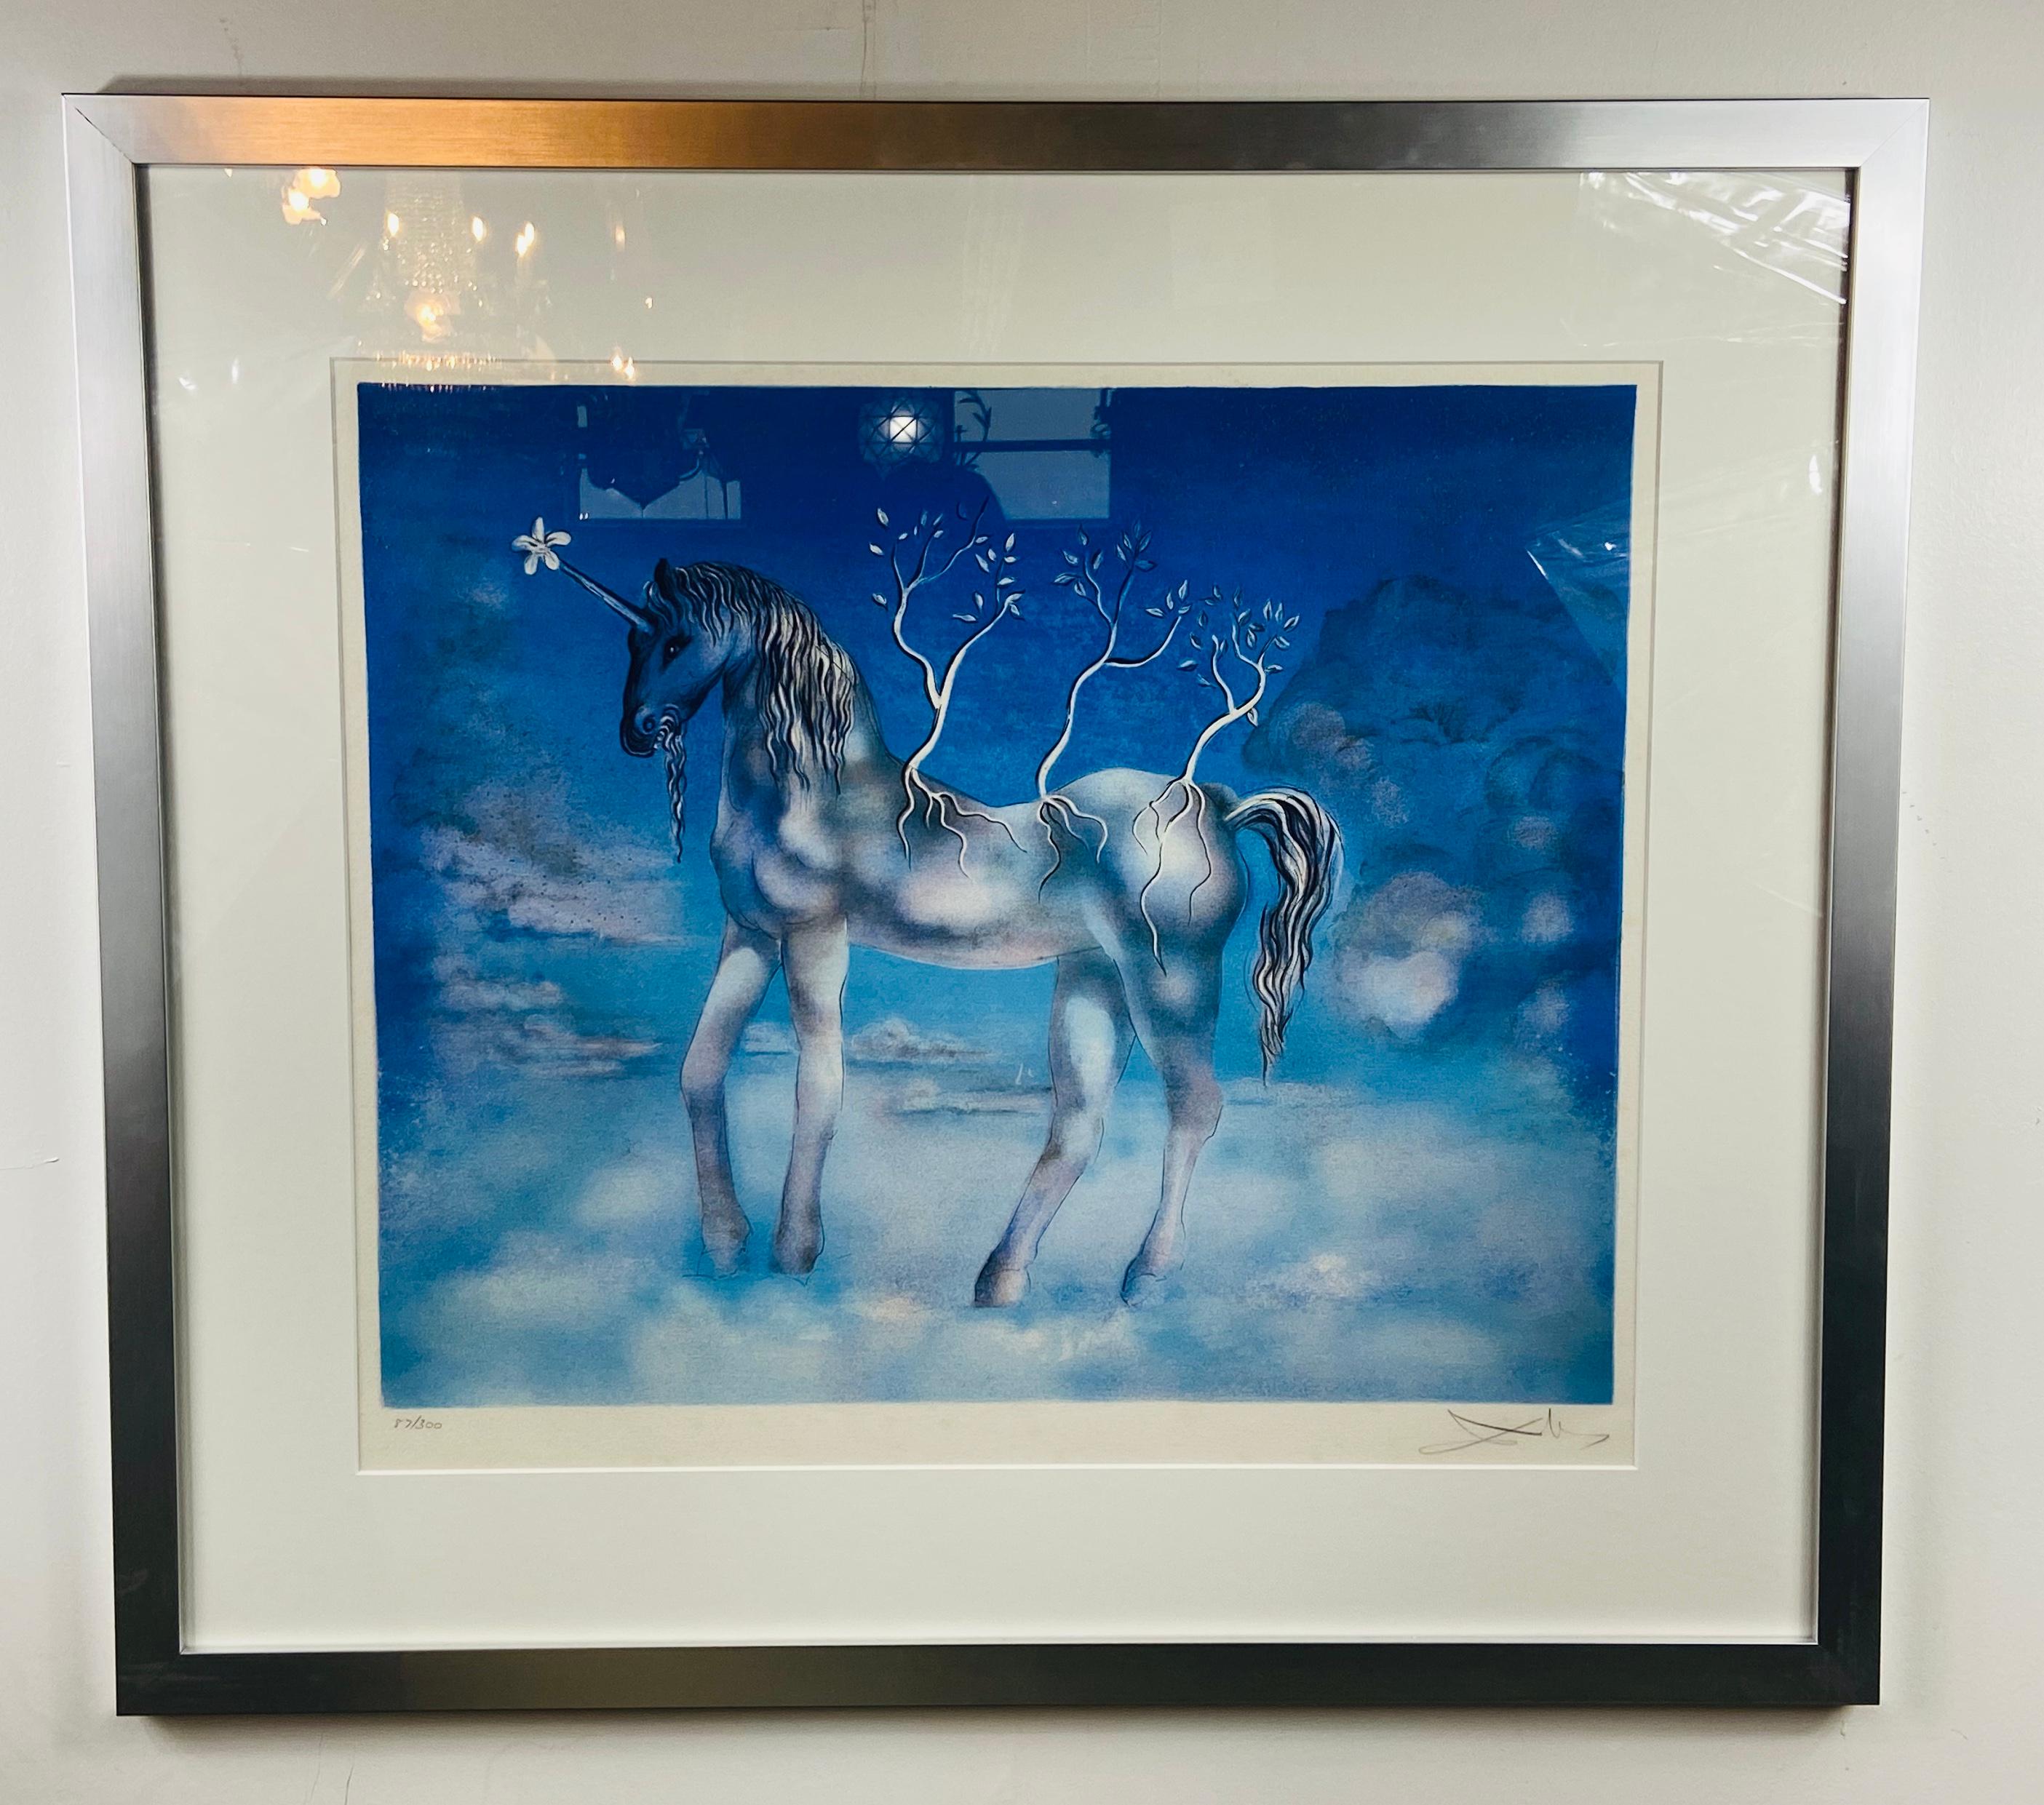 Modern Surrealist Salvador Dali Blue Unicorn Lithograph Signed and Numbered 87/300